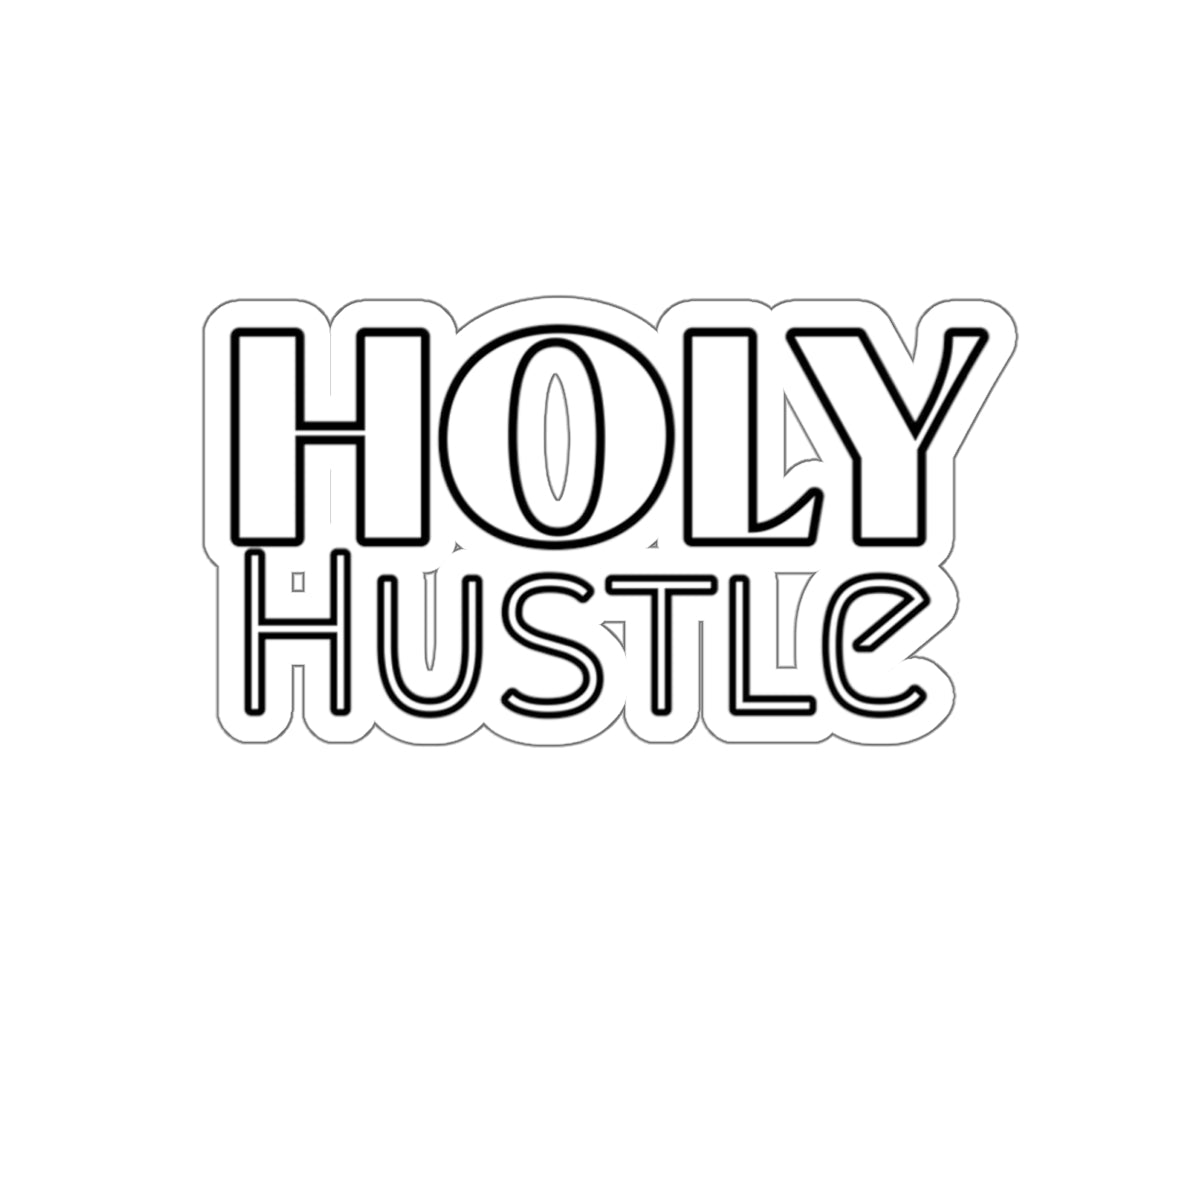 HOLY HUSTLE Decal, Sticker -The Bible Junkies®